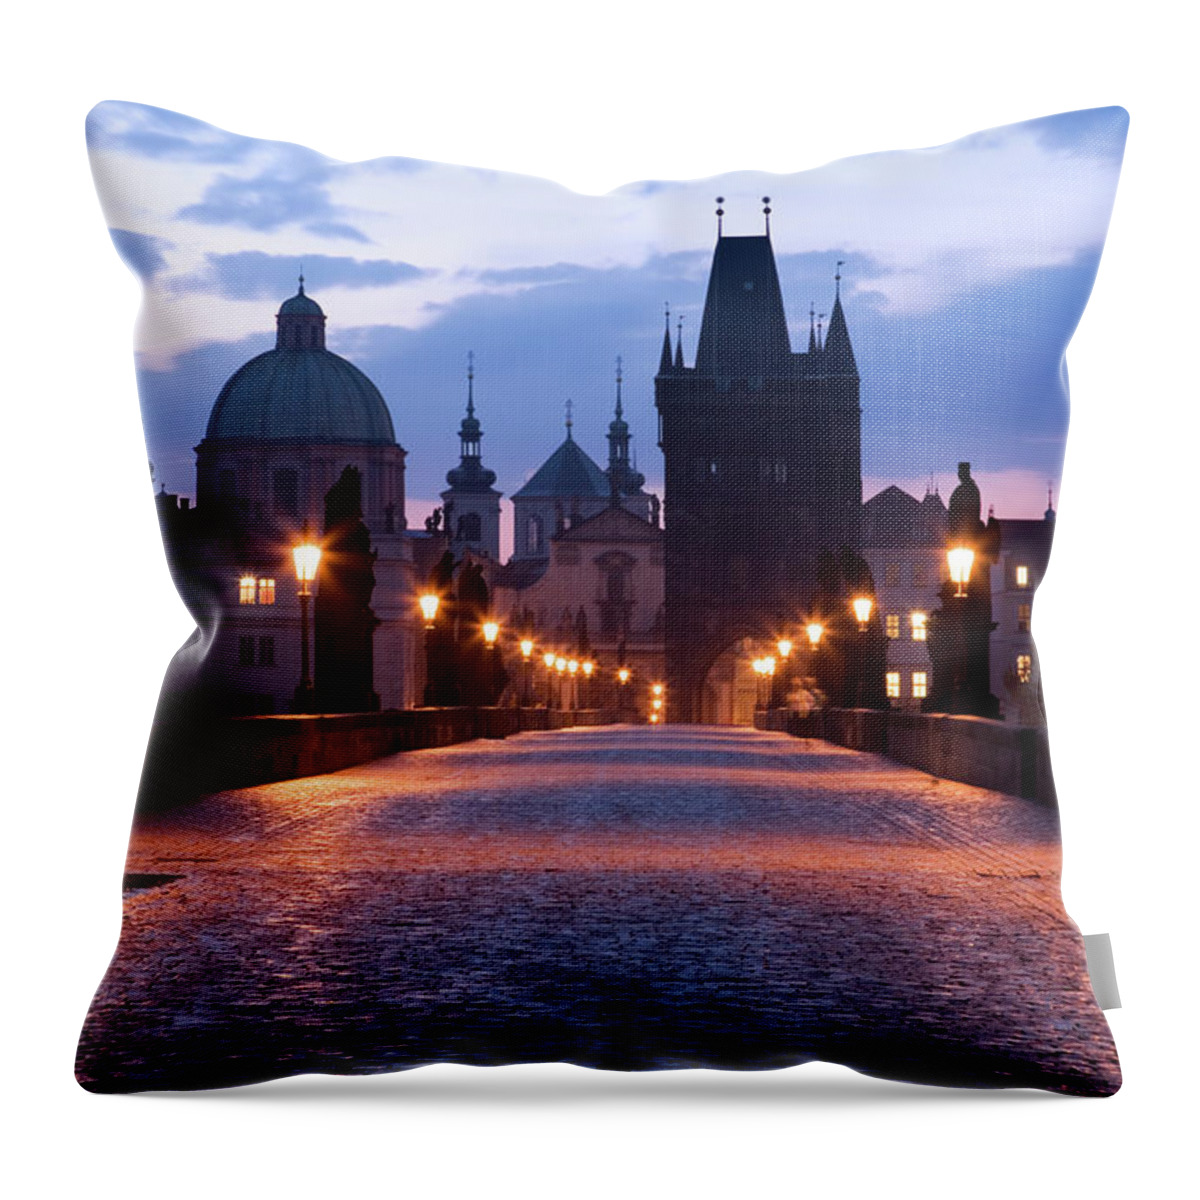 Scenics Throw Pillow featuring the photograph The Charles Bridge At Dawn, Prague by Uyen Le